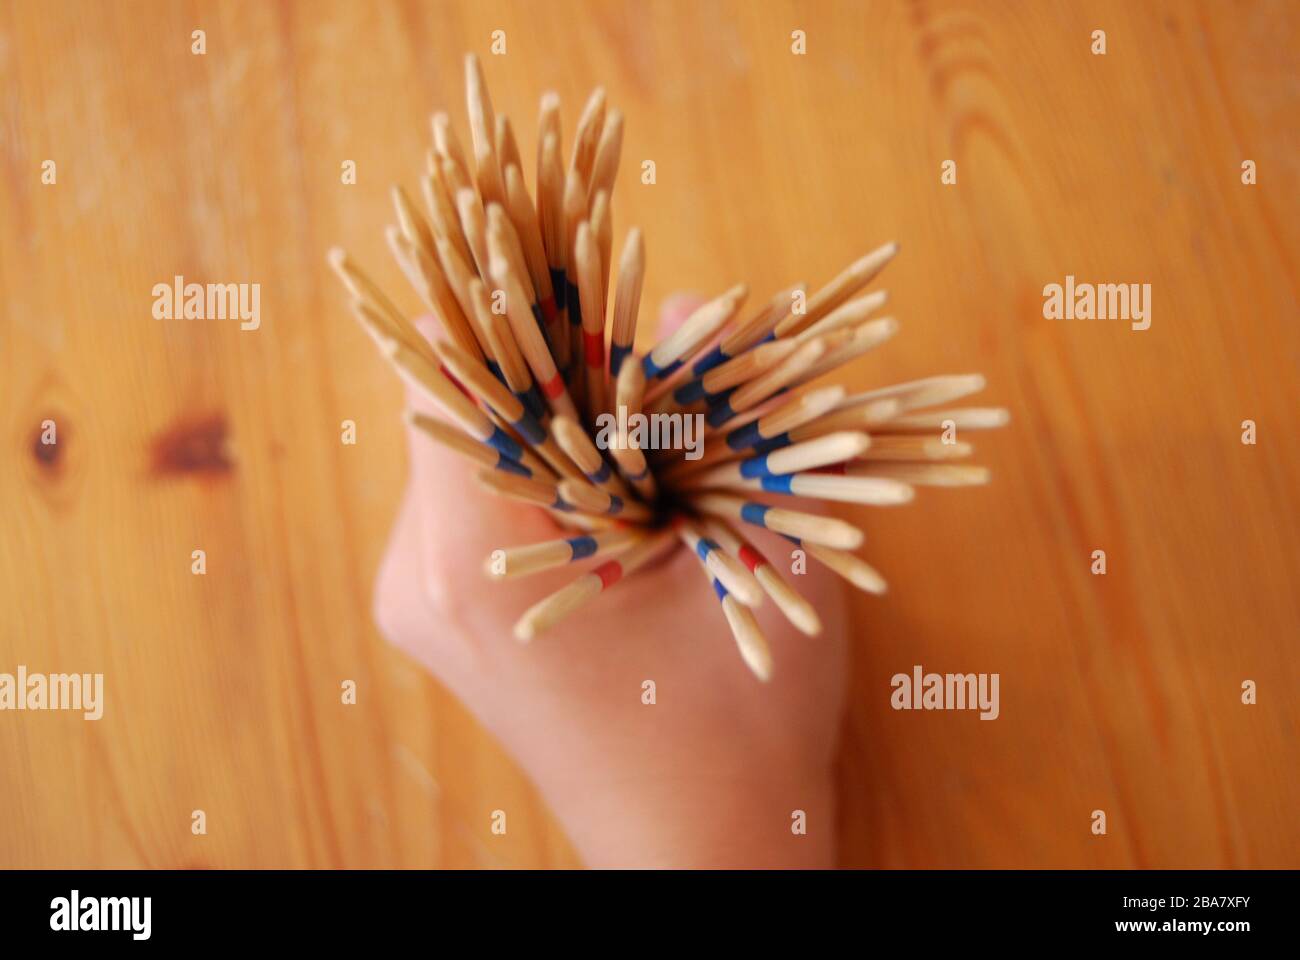 Wooden stick game in hands, playing toys - hobbies kids or adults Stock Photo